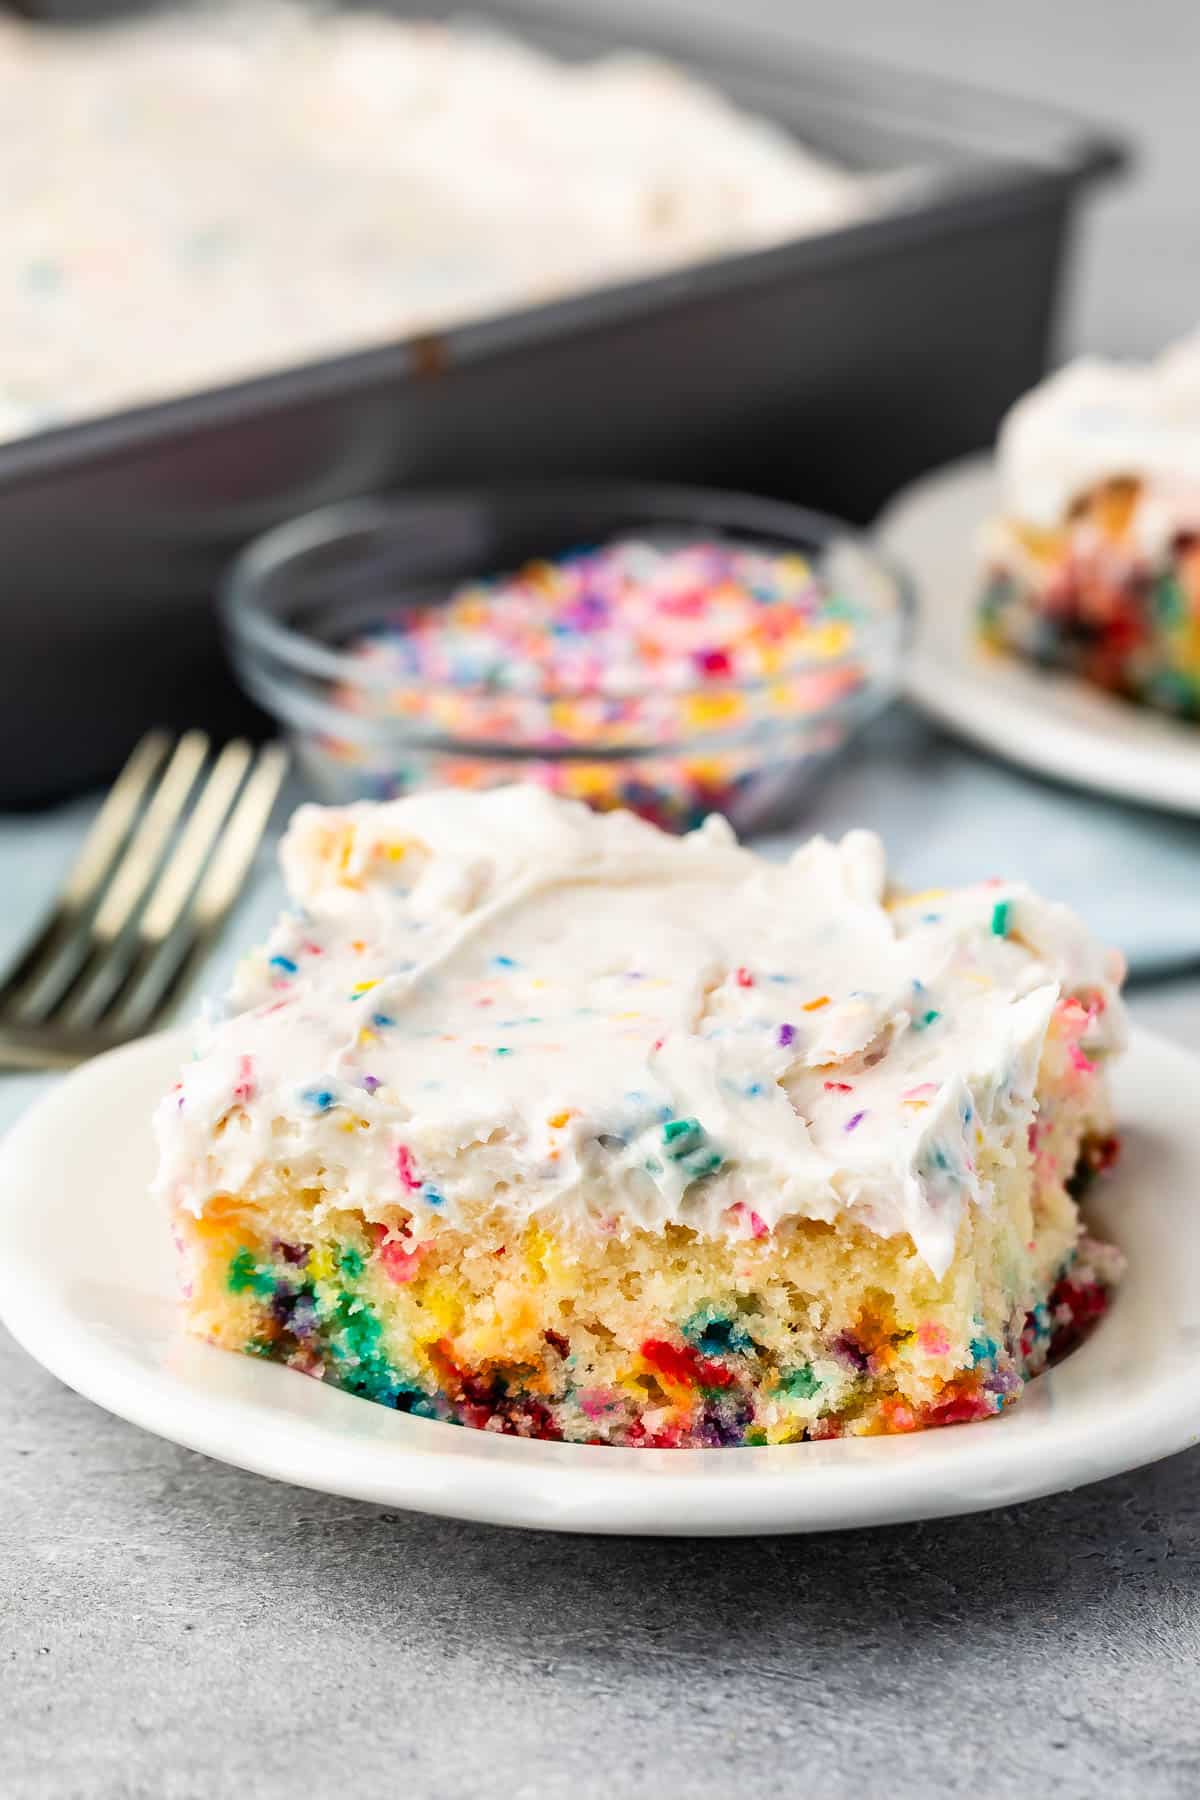 white cake with colorful sprinkles baked in and white frosting with more sprinkles mixed in on top.